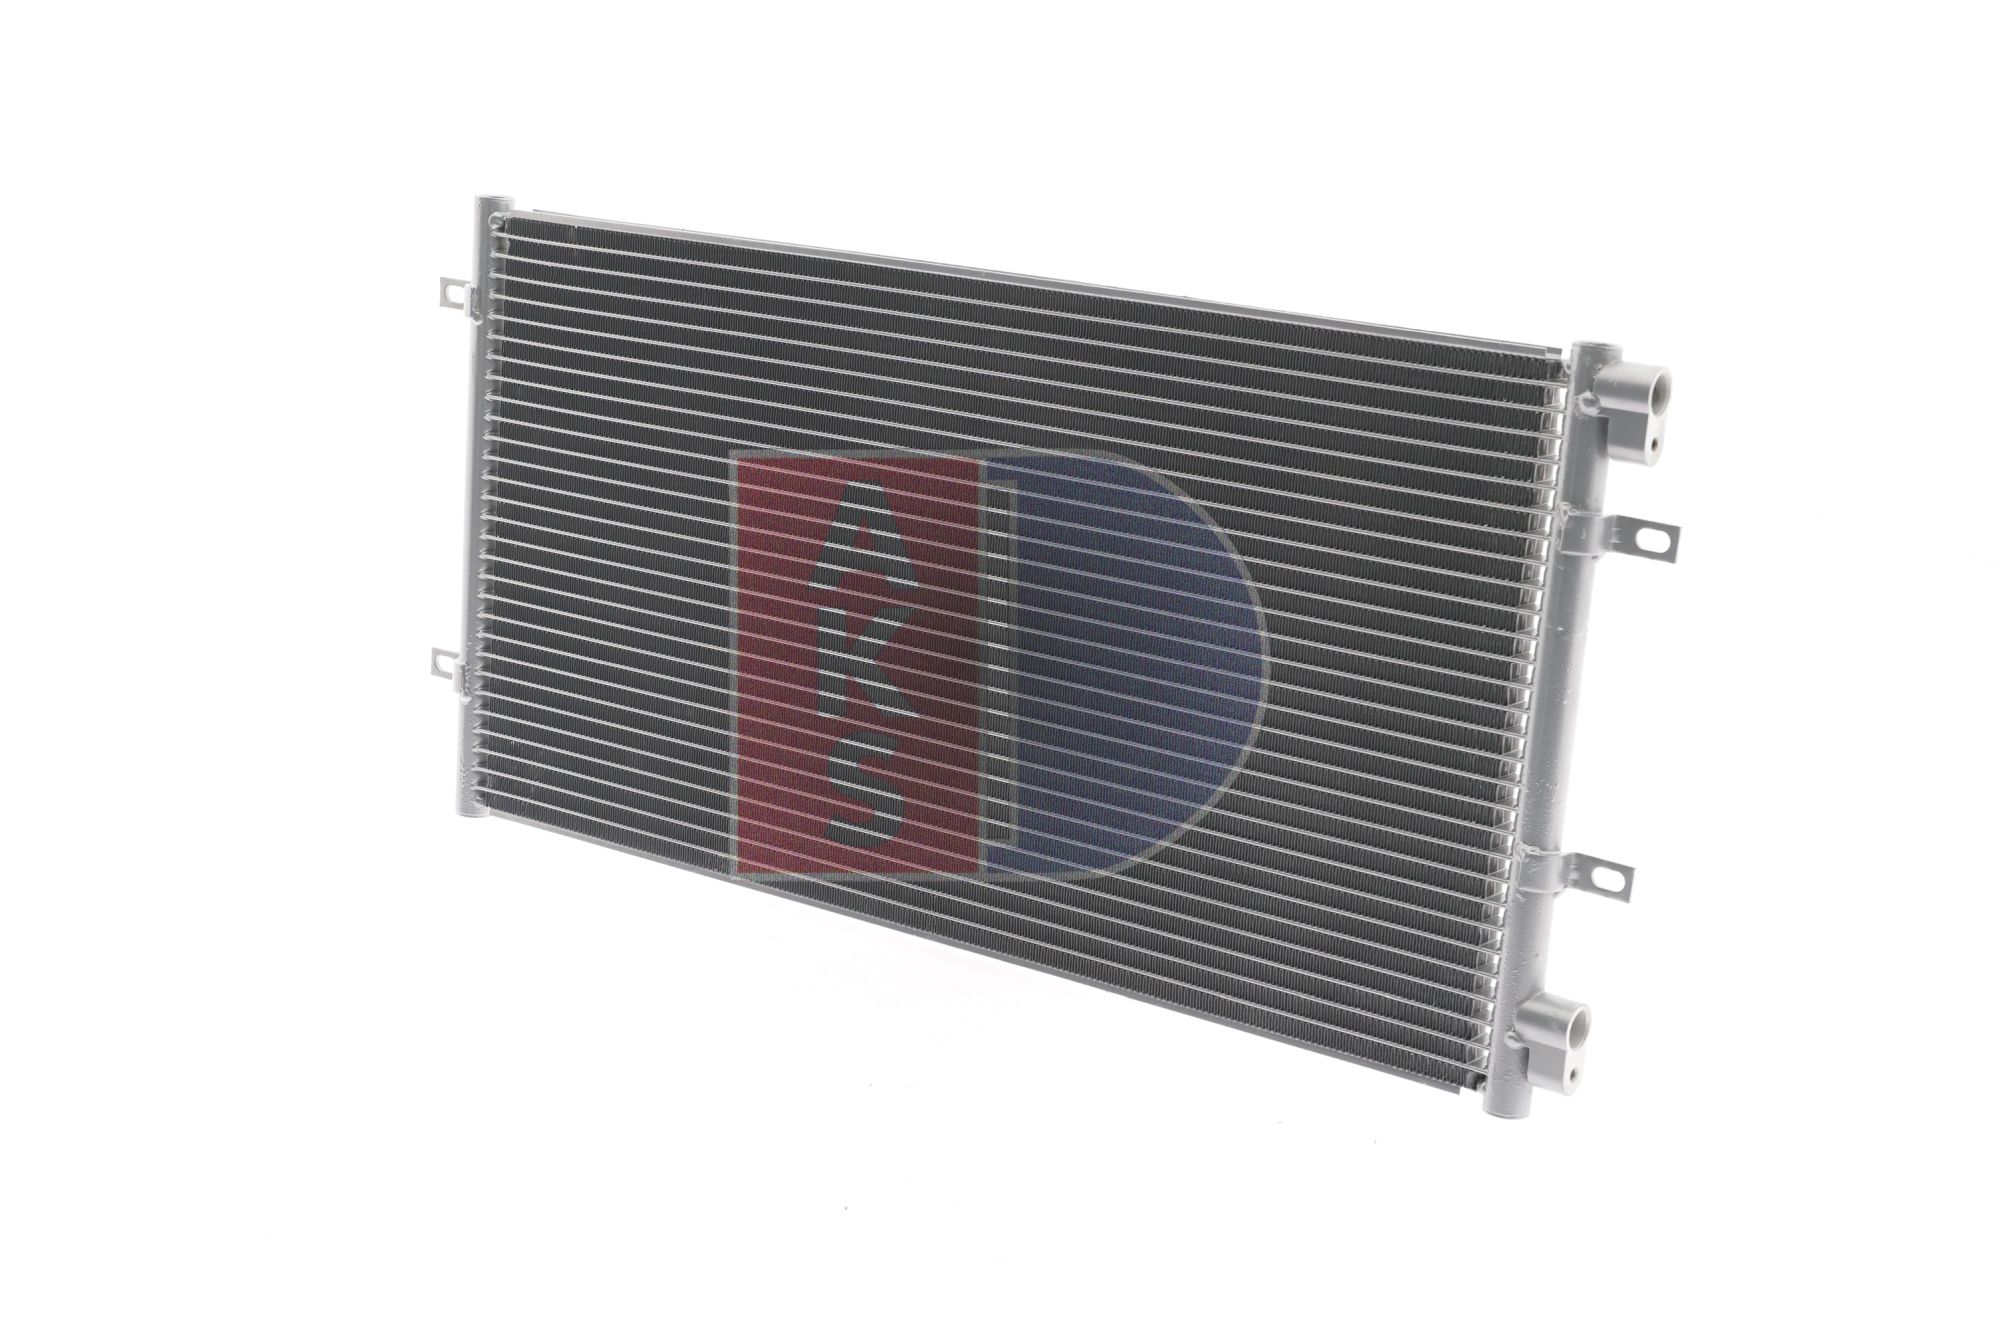 AKS DASIS 082006N Air conditioning condenser without dryer, 15,5mm, 15,5mm, 562mm